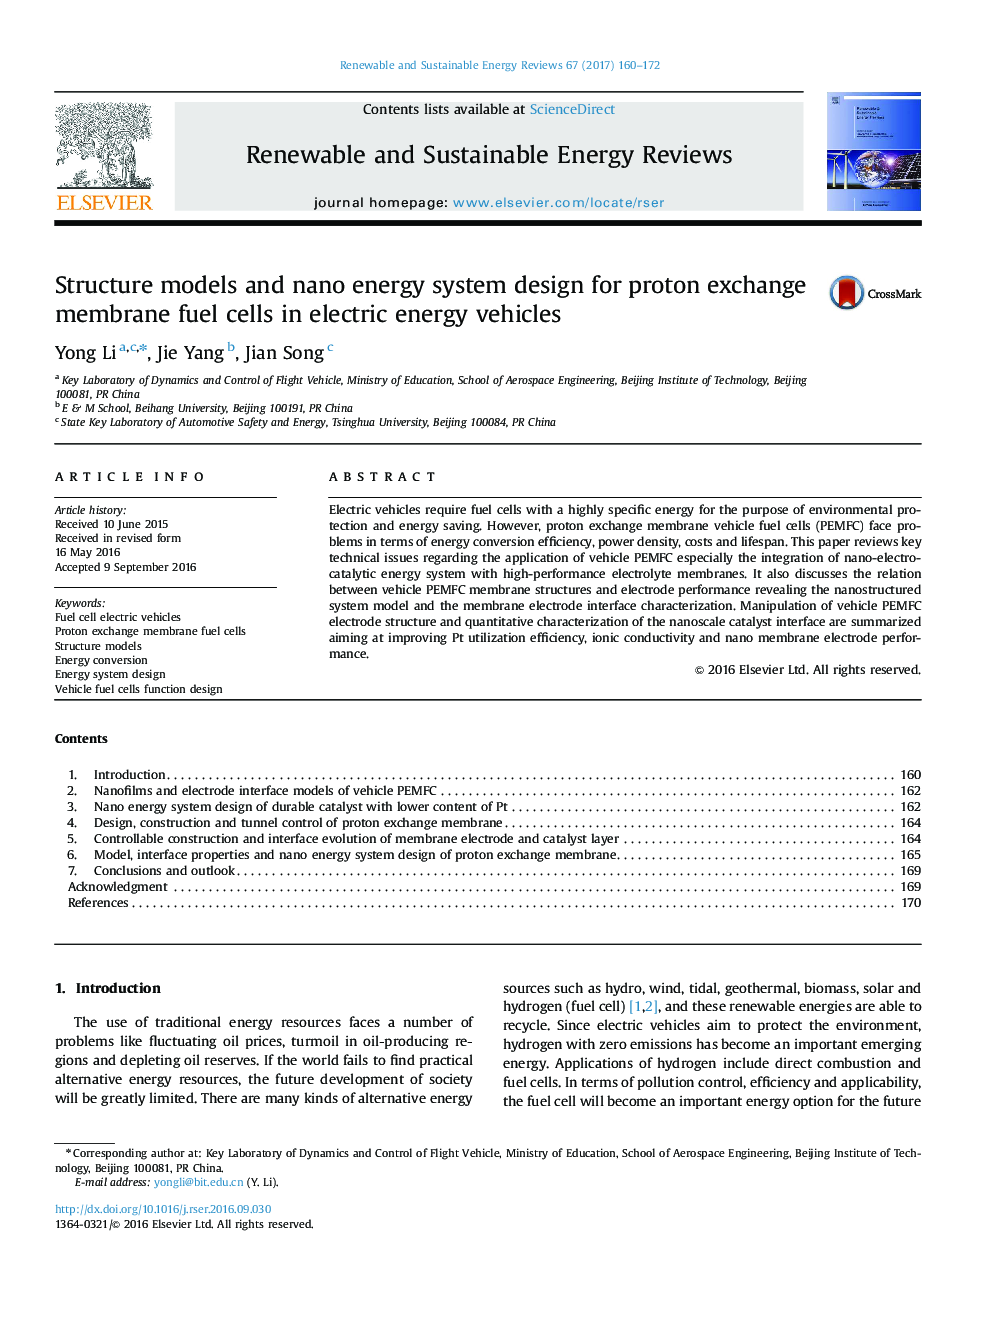 Structure models and nano energy system design for proton exchange membrane fuel cells in electric energy vehicles